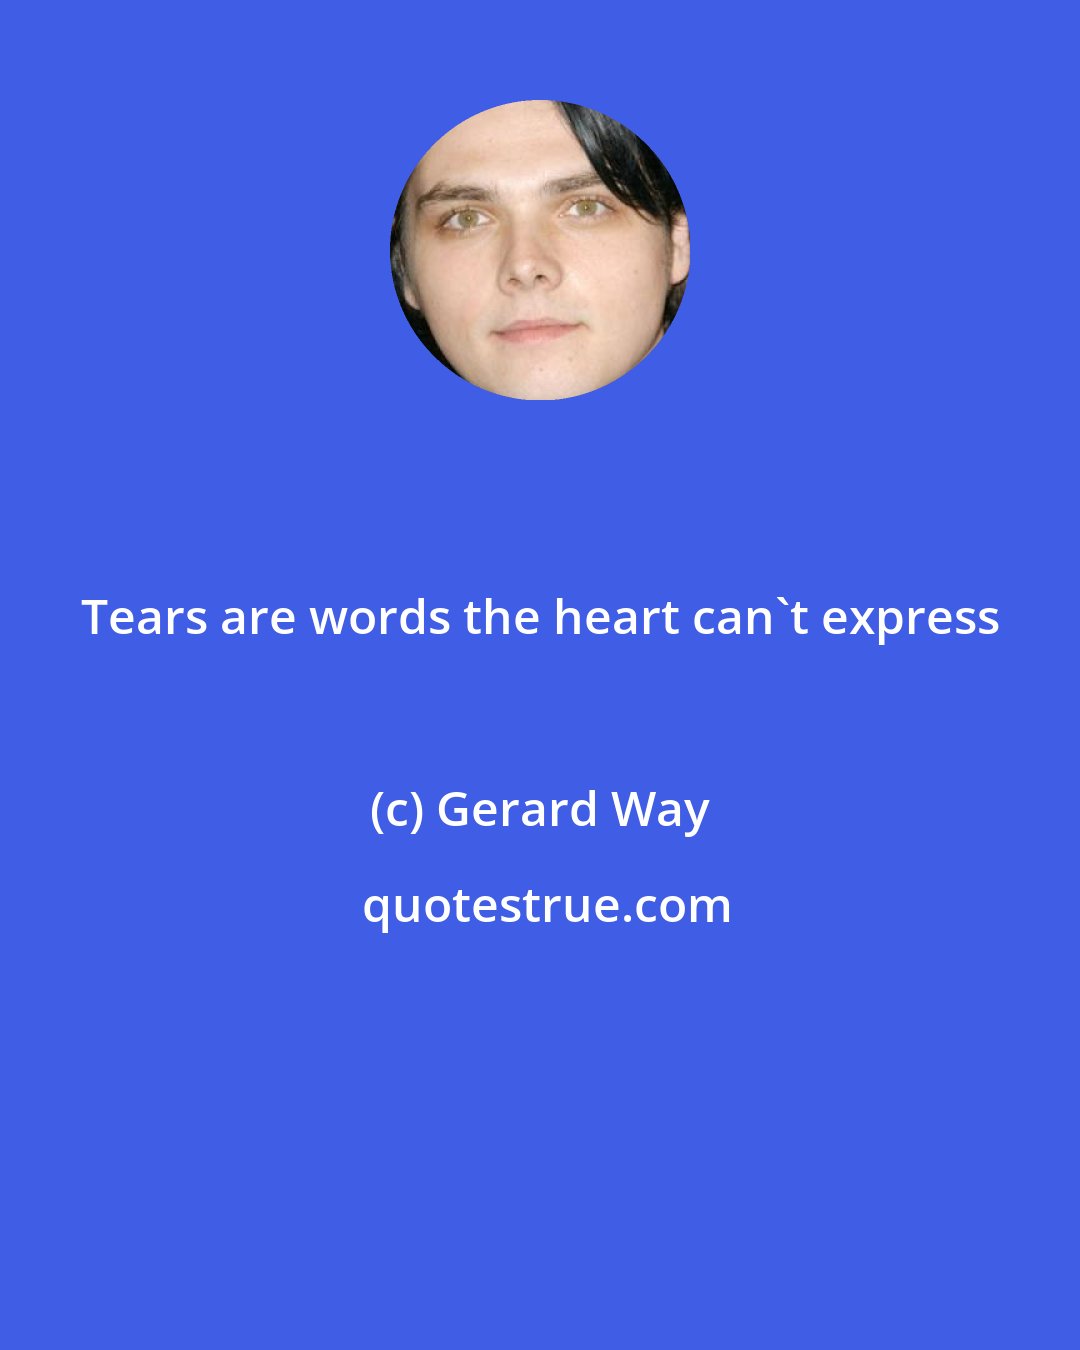 Gerard Way: Tears are words the heart can't express